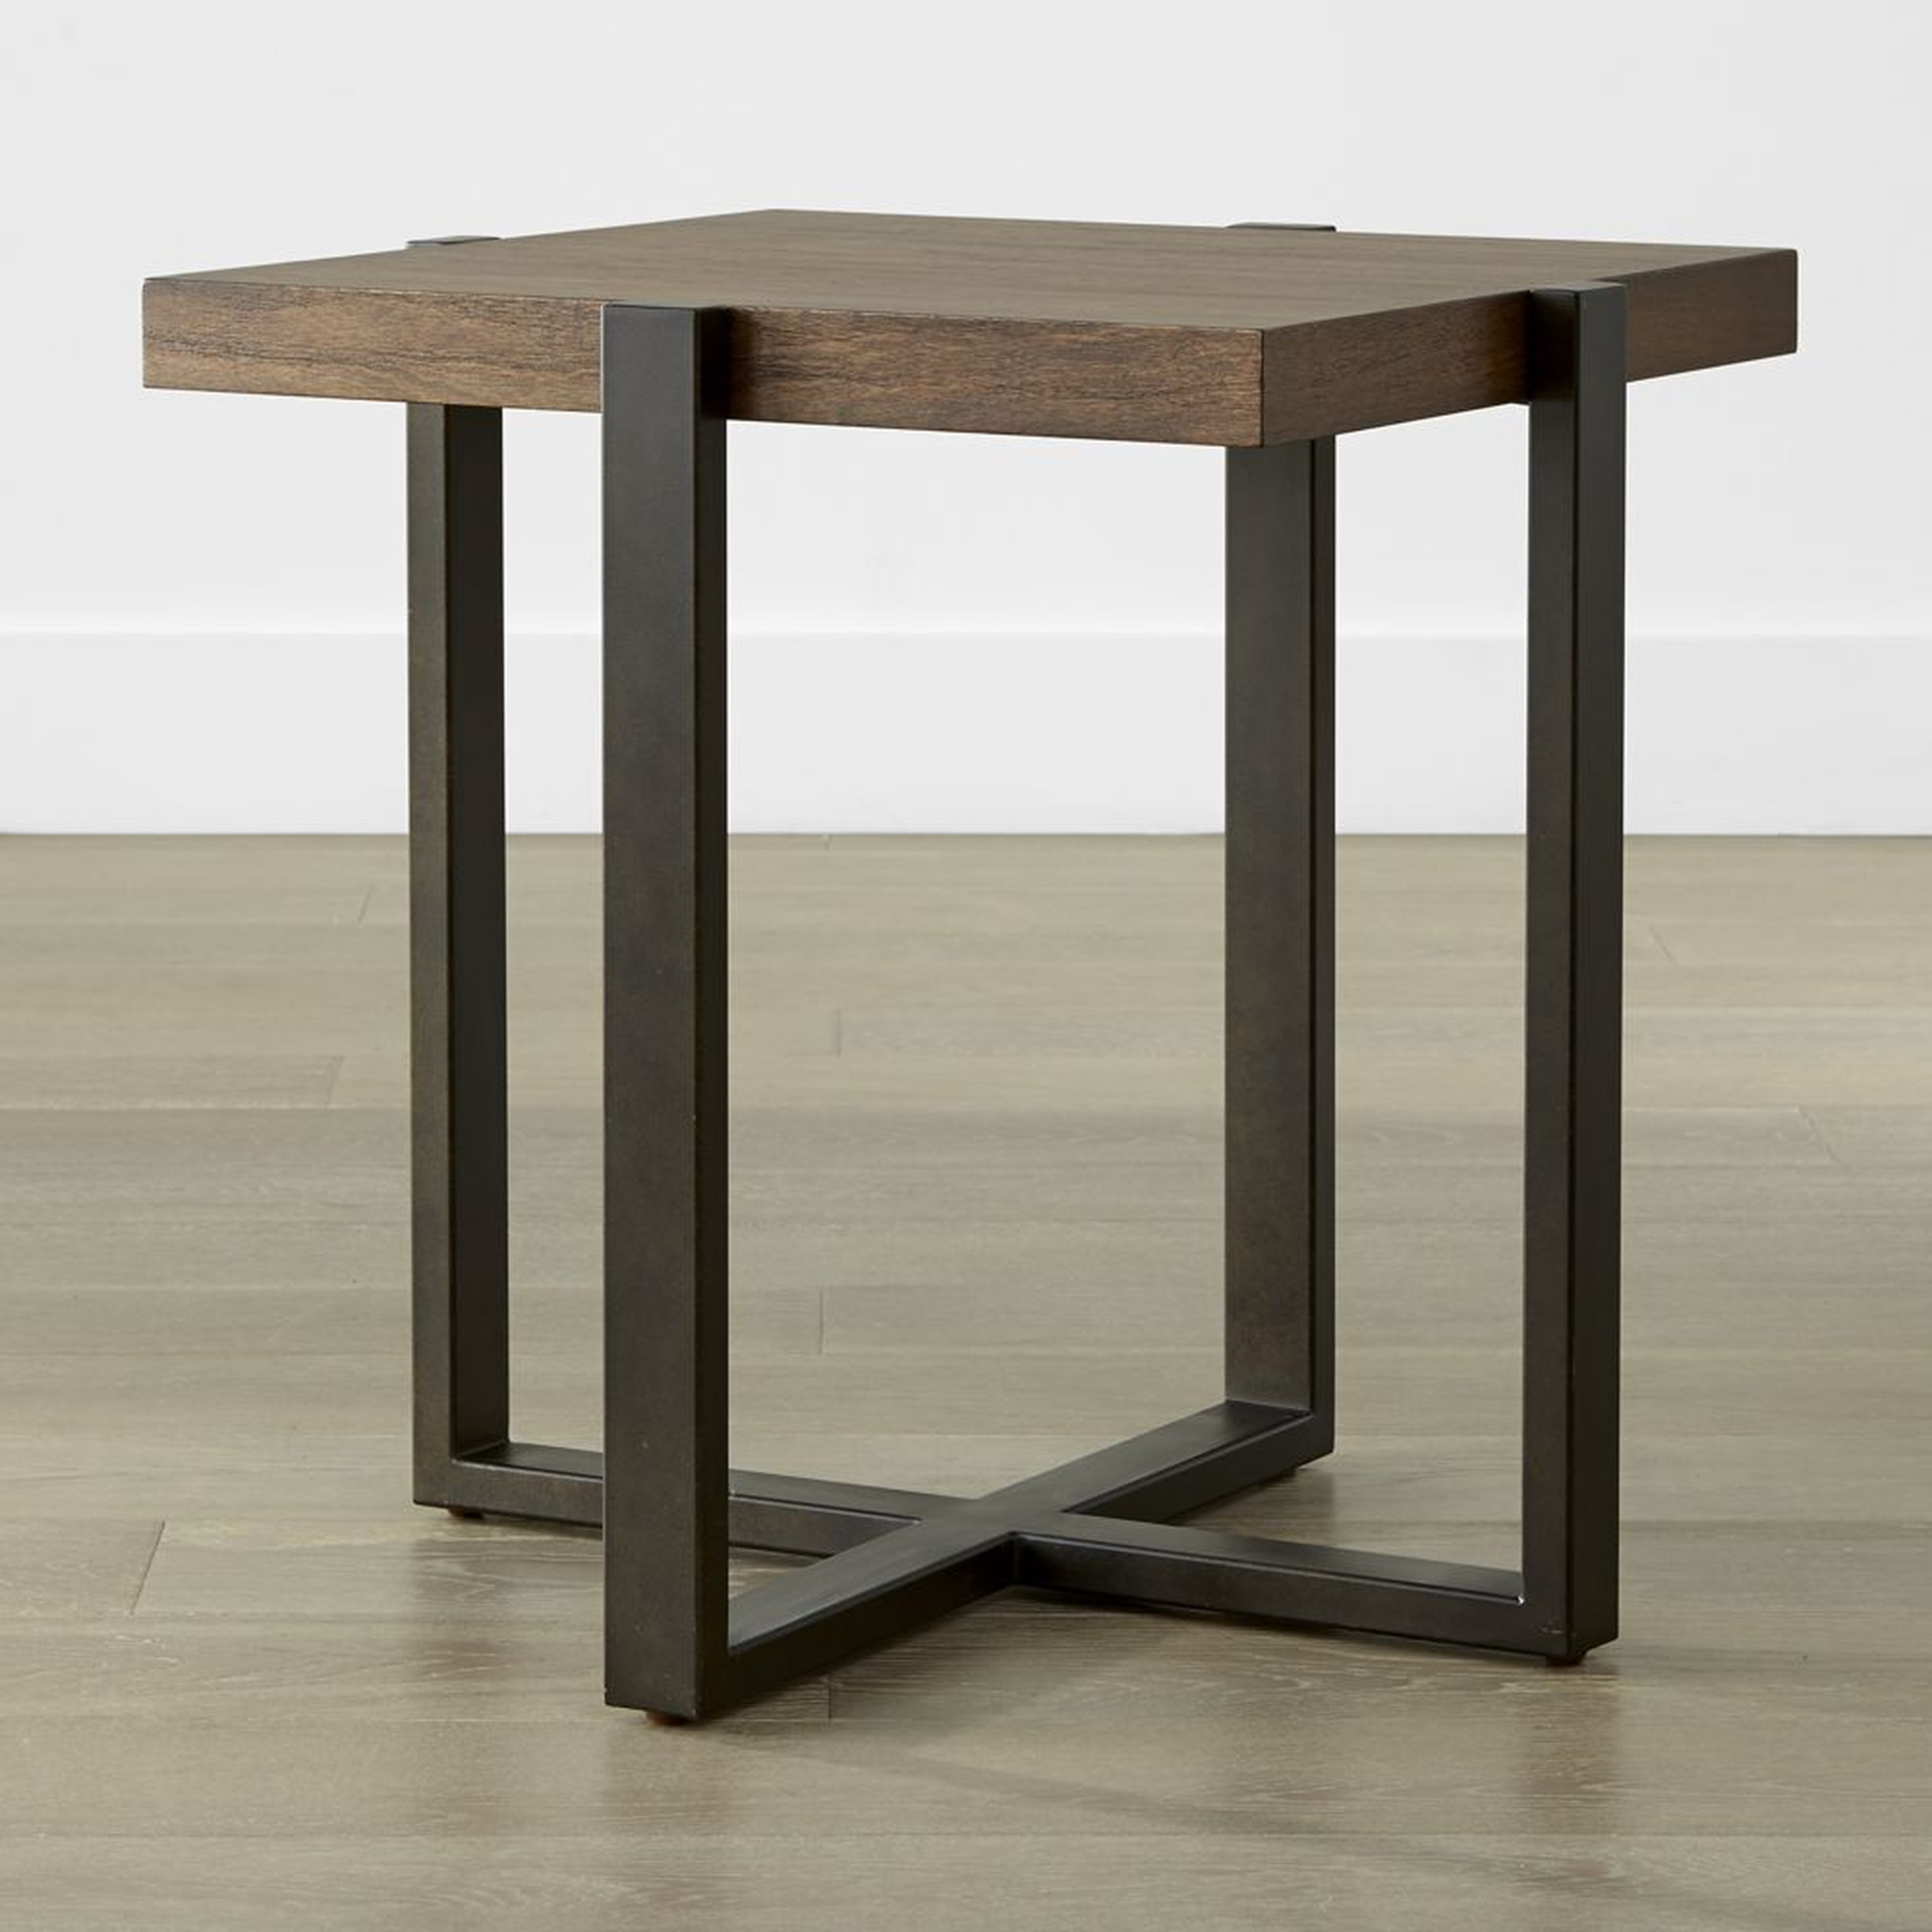 Lodge Square Side Table - Crate and Barrel